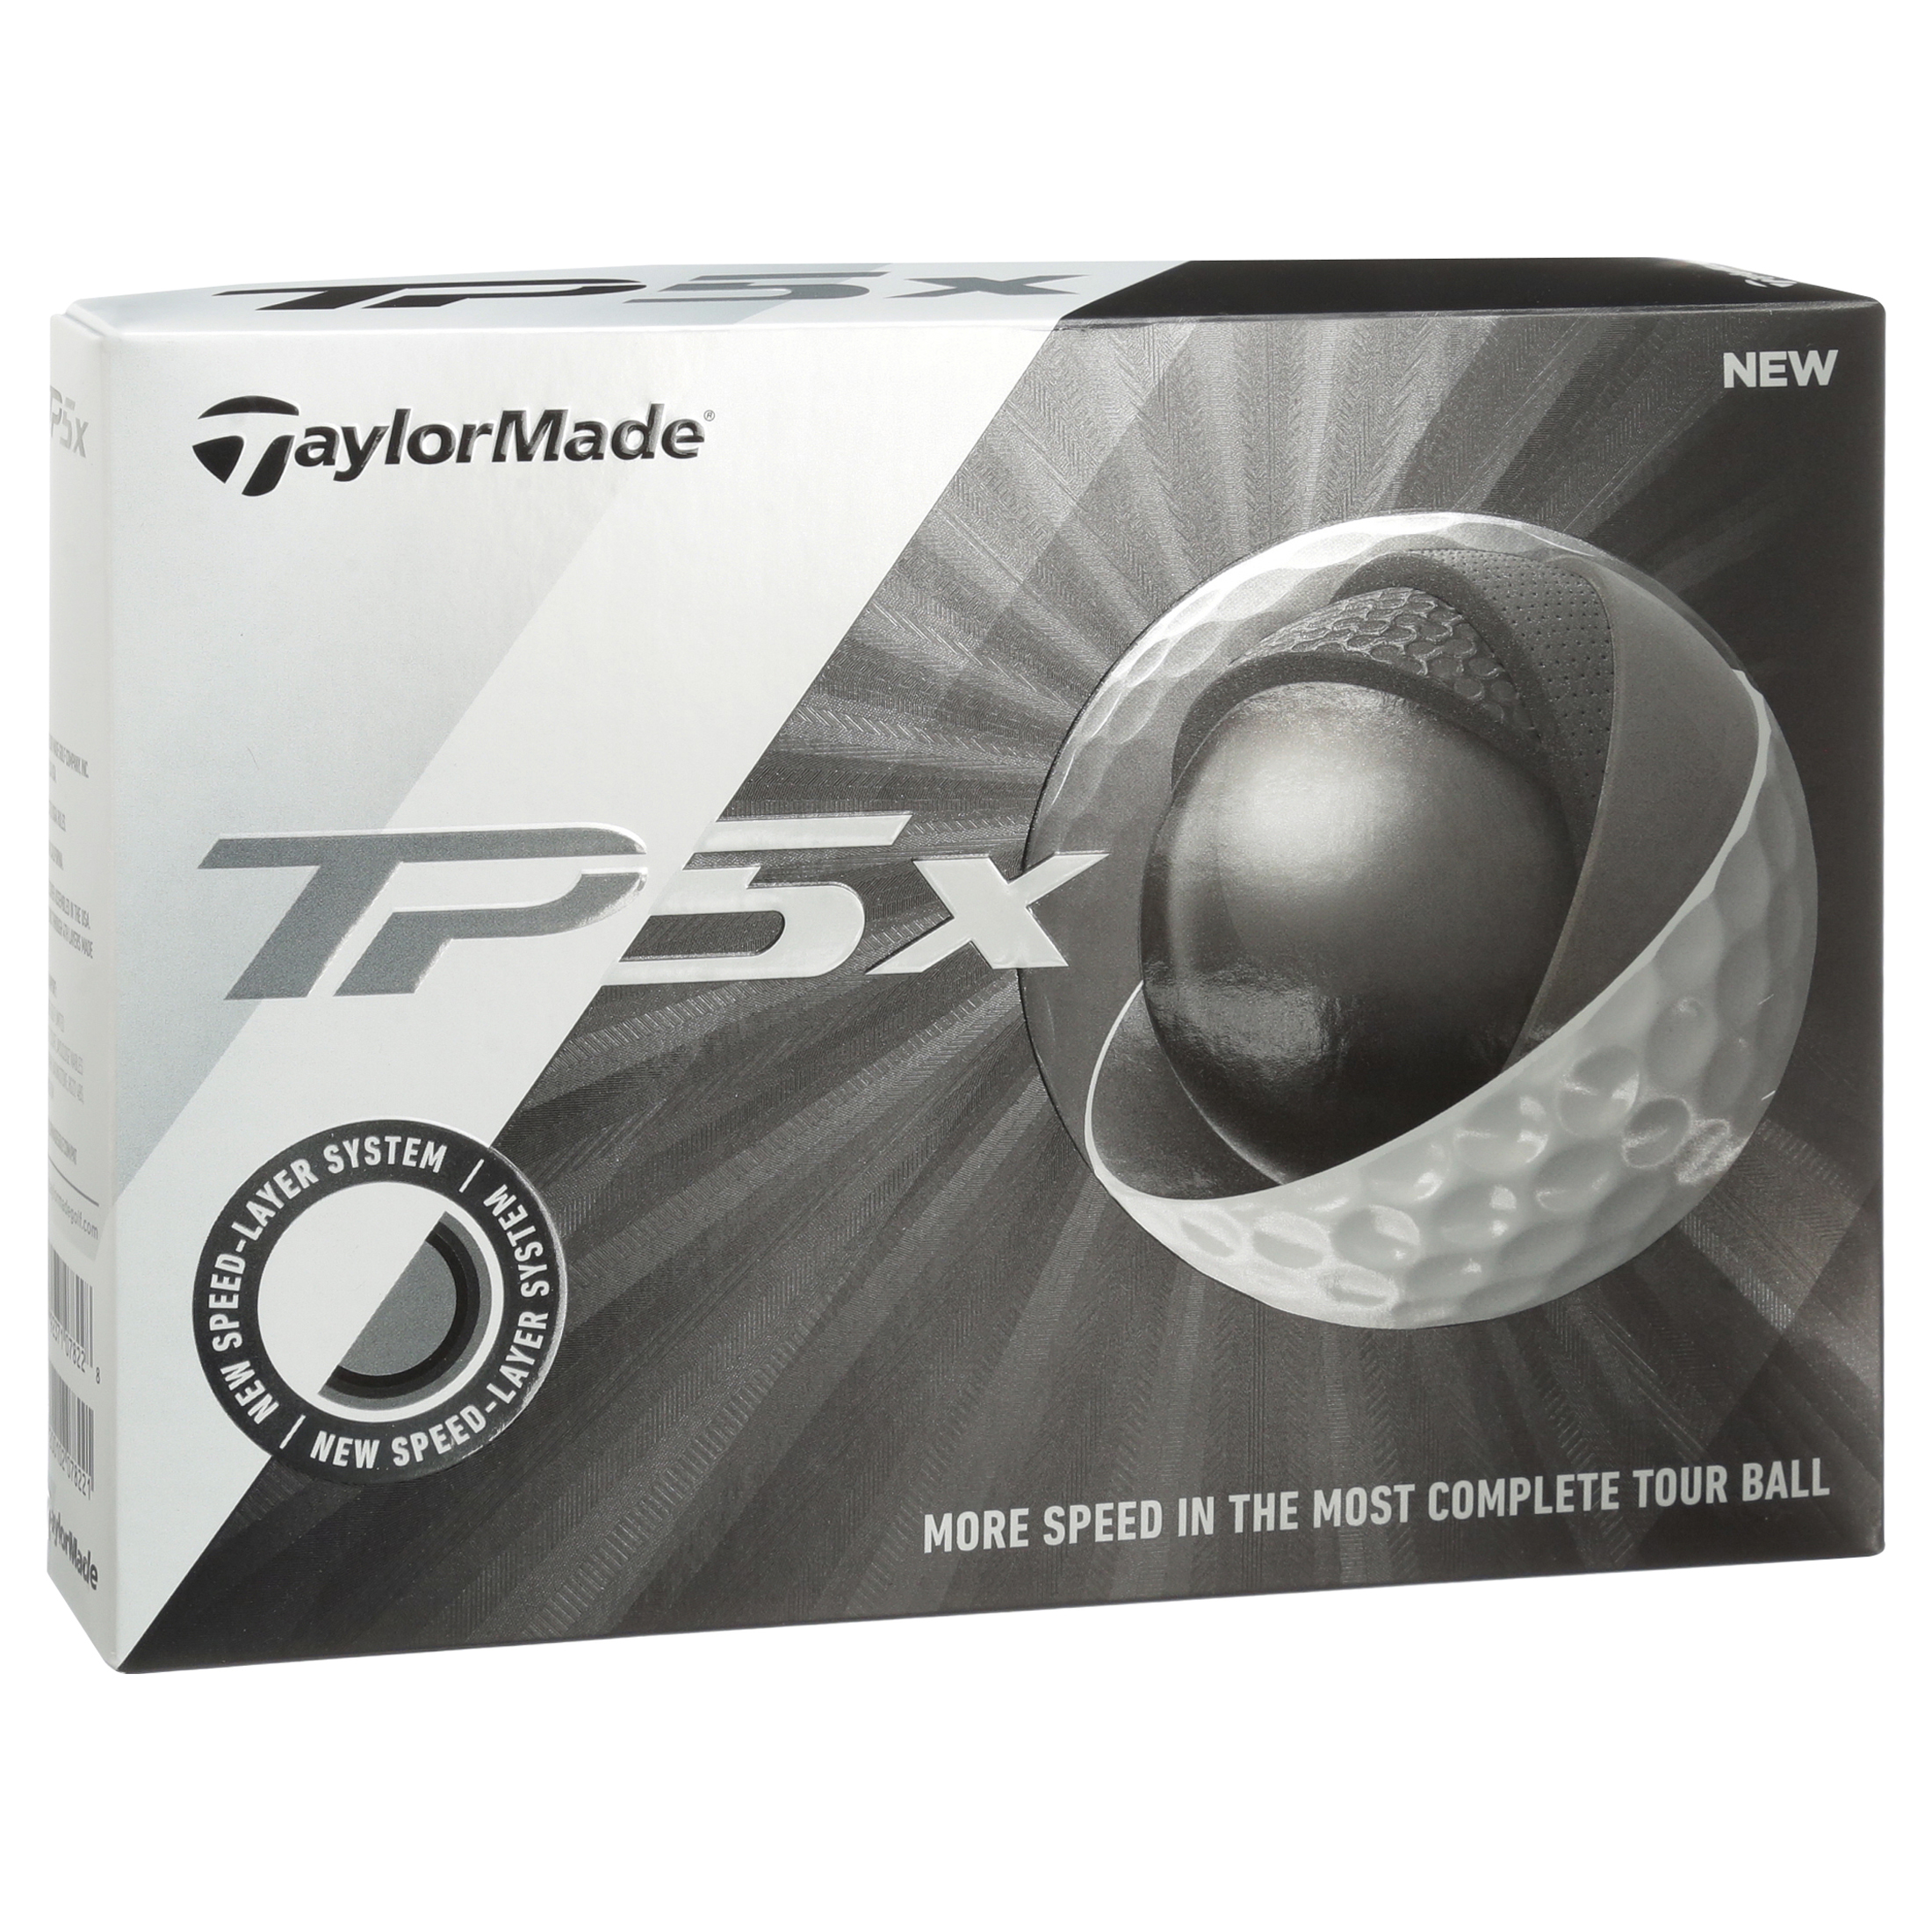 TaylorMade TP5x Golf Balls, 12 Pack - image 4 of 7